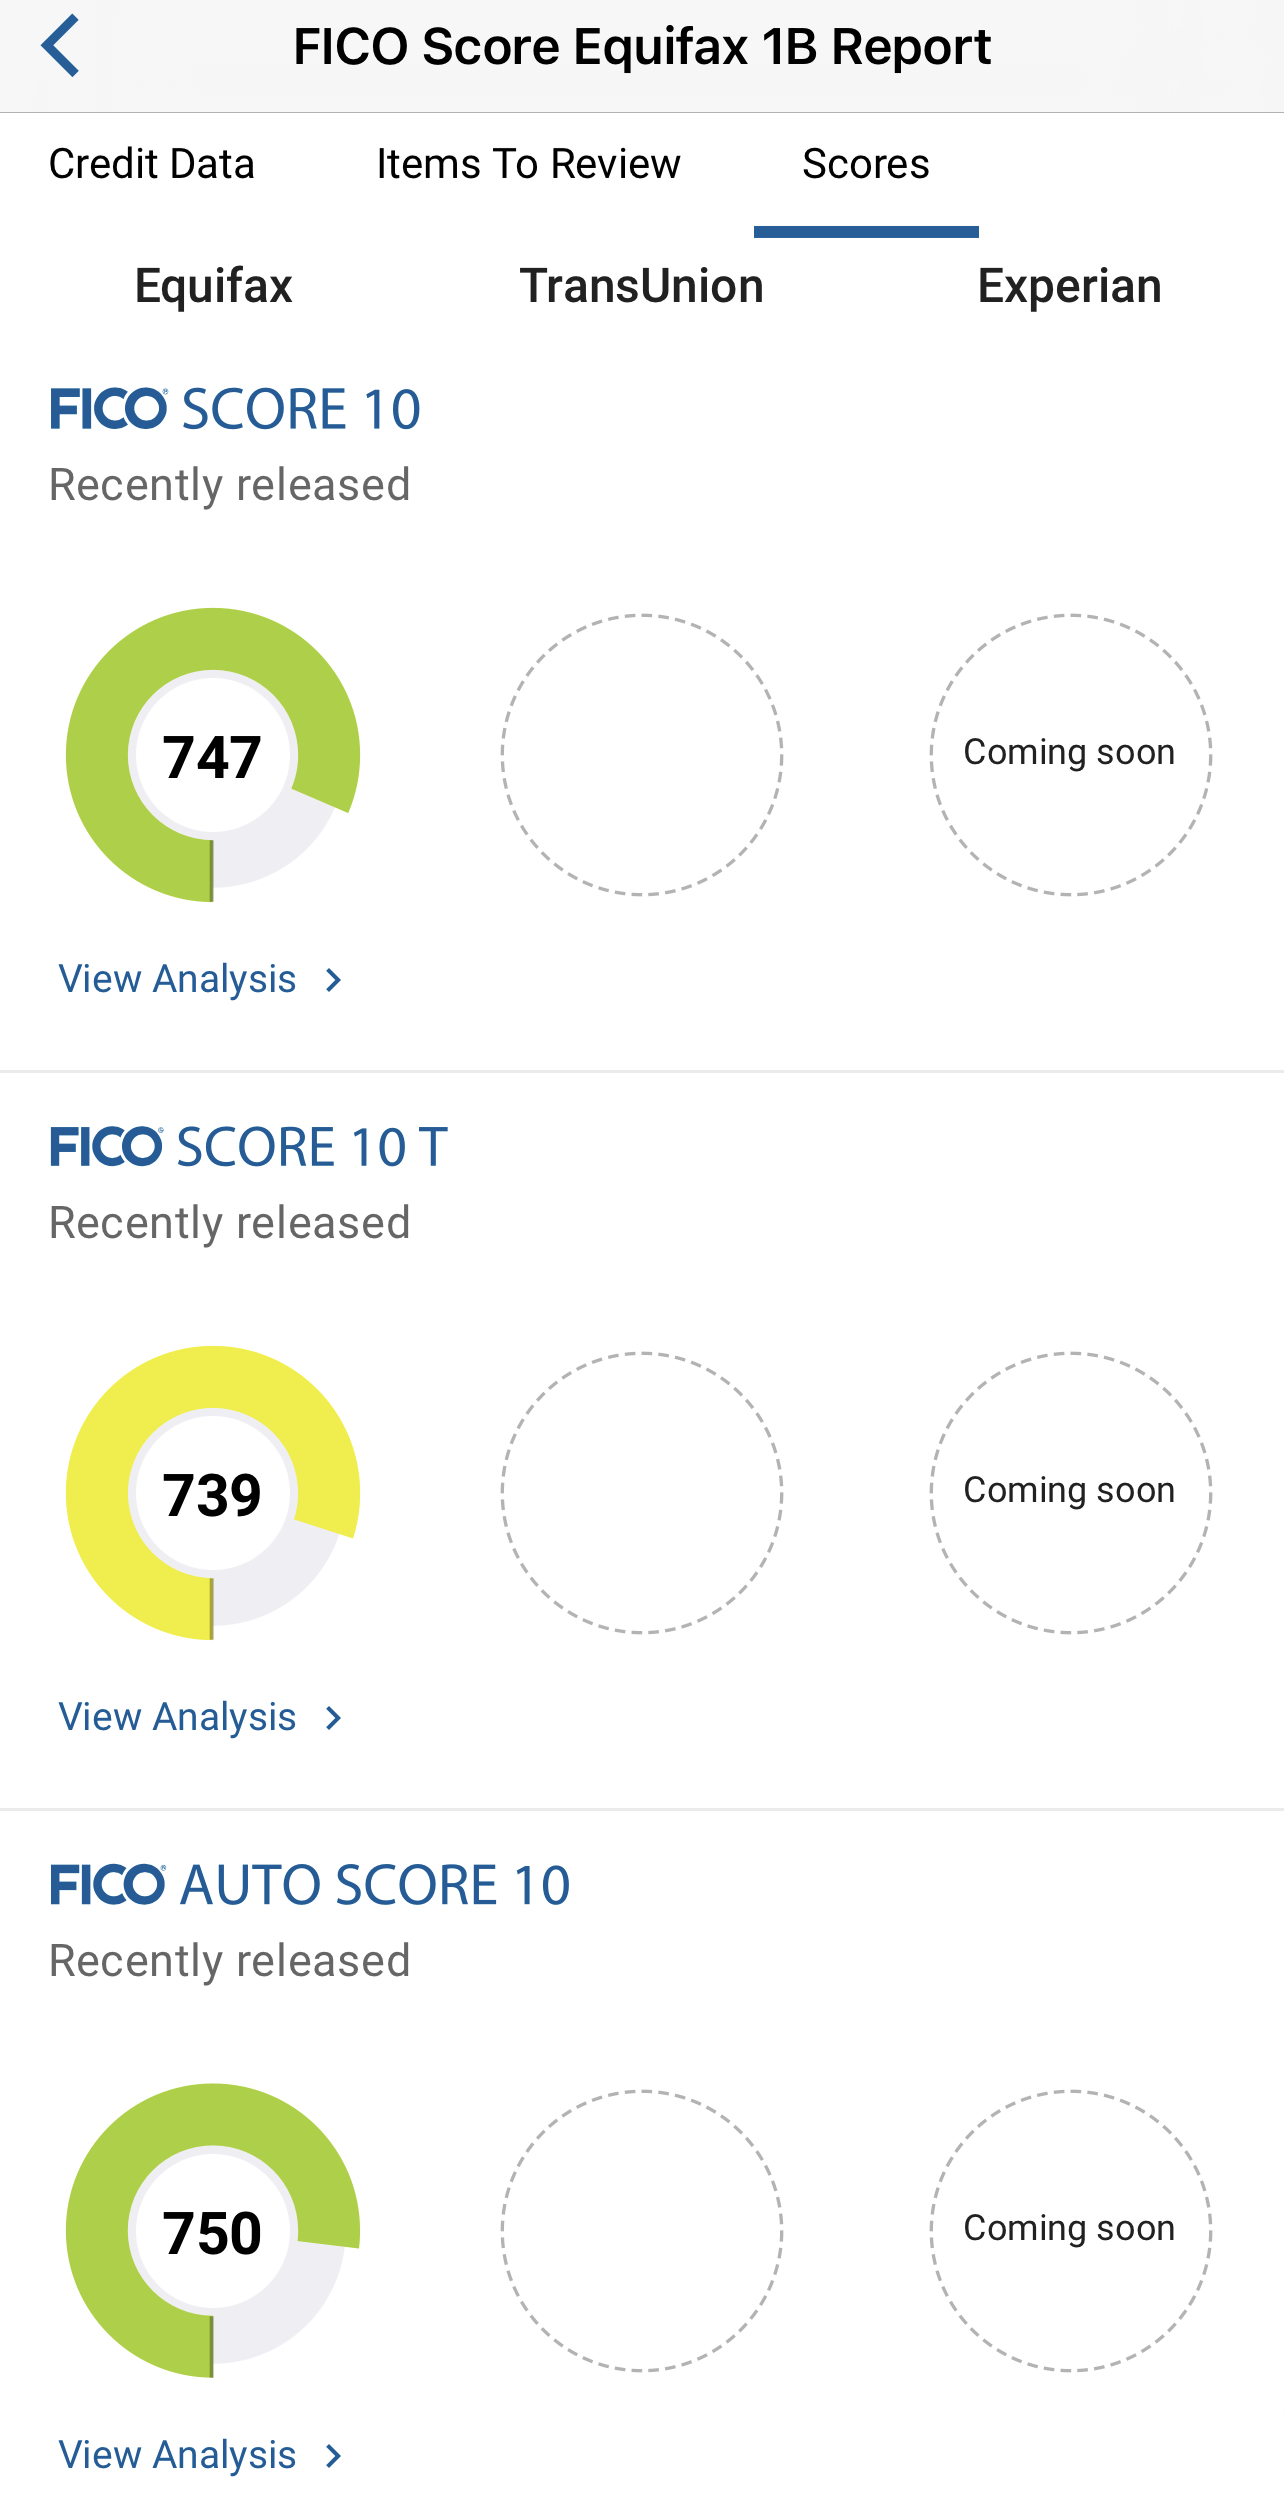 fico-10-s-now-reported-on-myfico-scores-myfico-forums-6513432